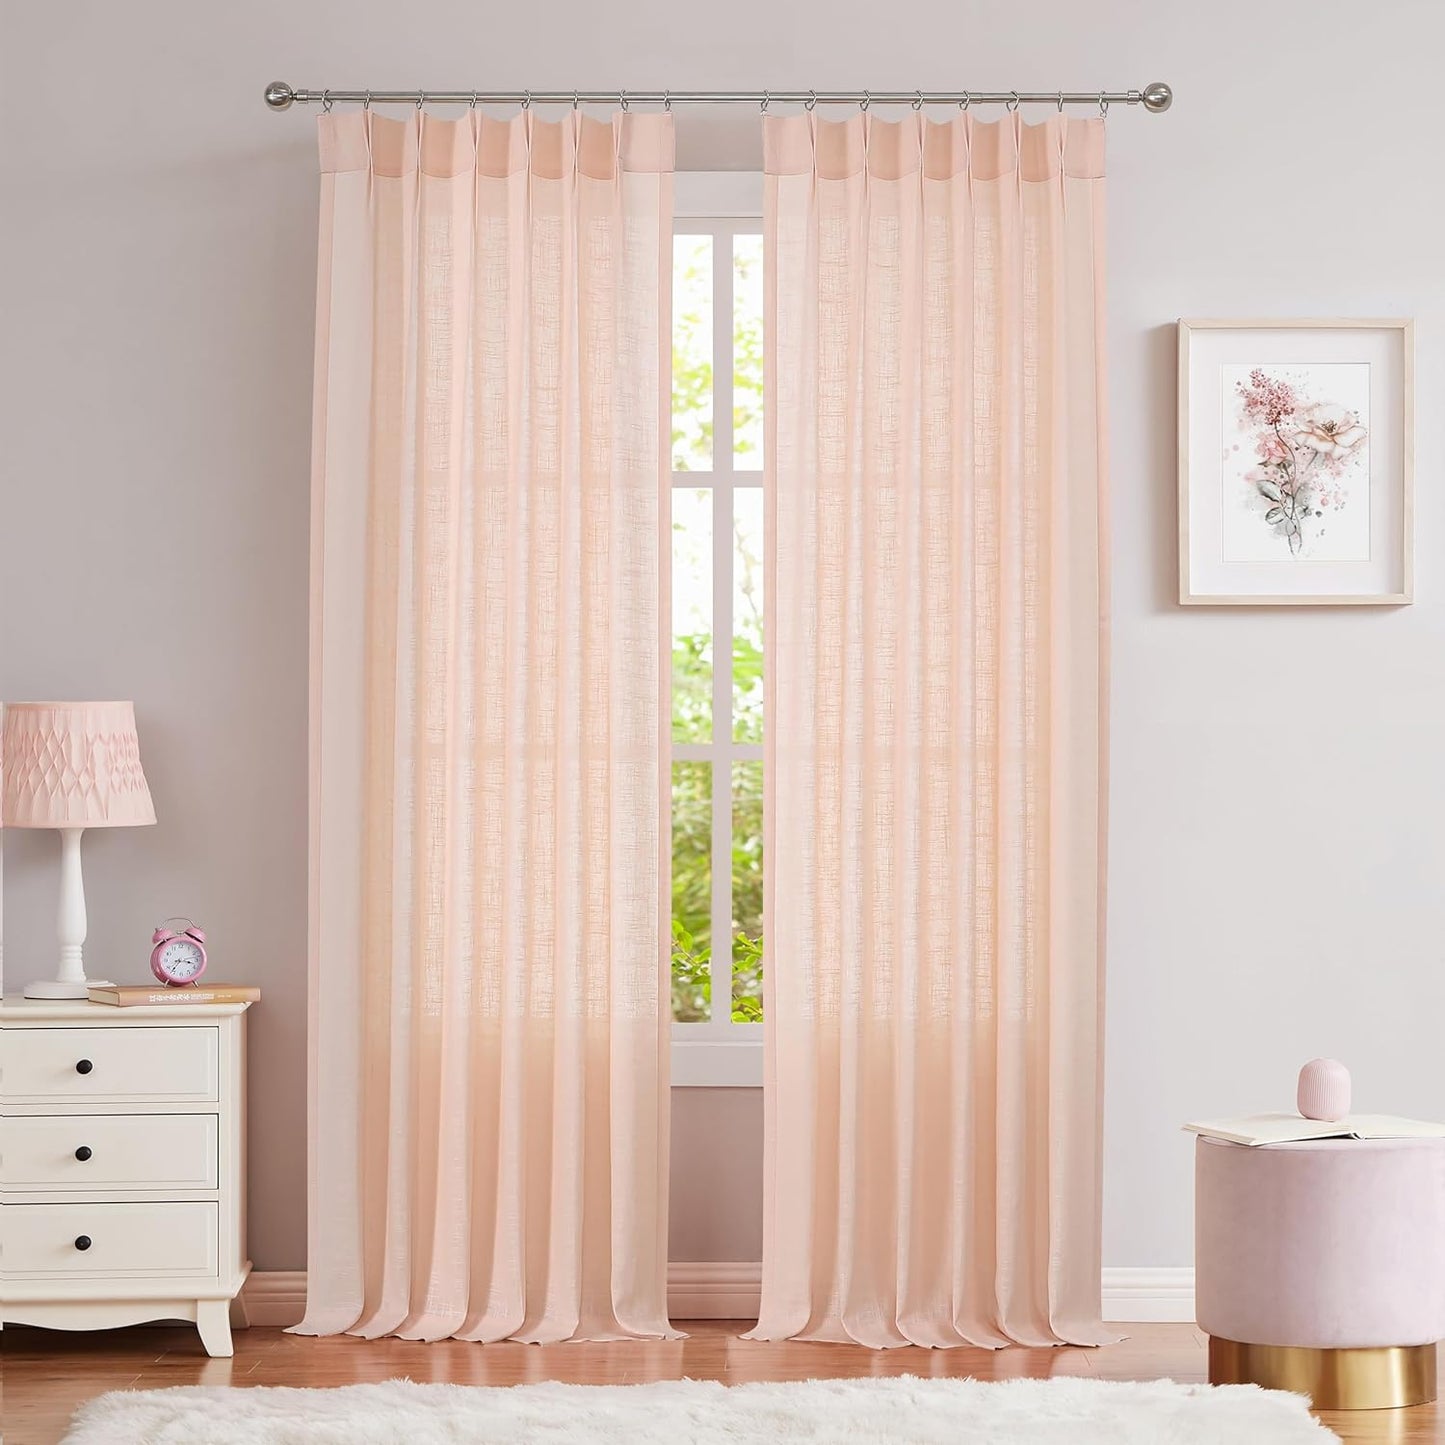 White Pinch Pleated Curtain Semi Sheer Curtain Panel Linen Cotton Blend Decorative Drape 84 Inches Long for Living Room Bedroom Farmhouse Rustic Window Treatment, White, 34"X84"X2  Central Park Coral Pink 34"X95"X2 